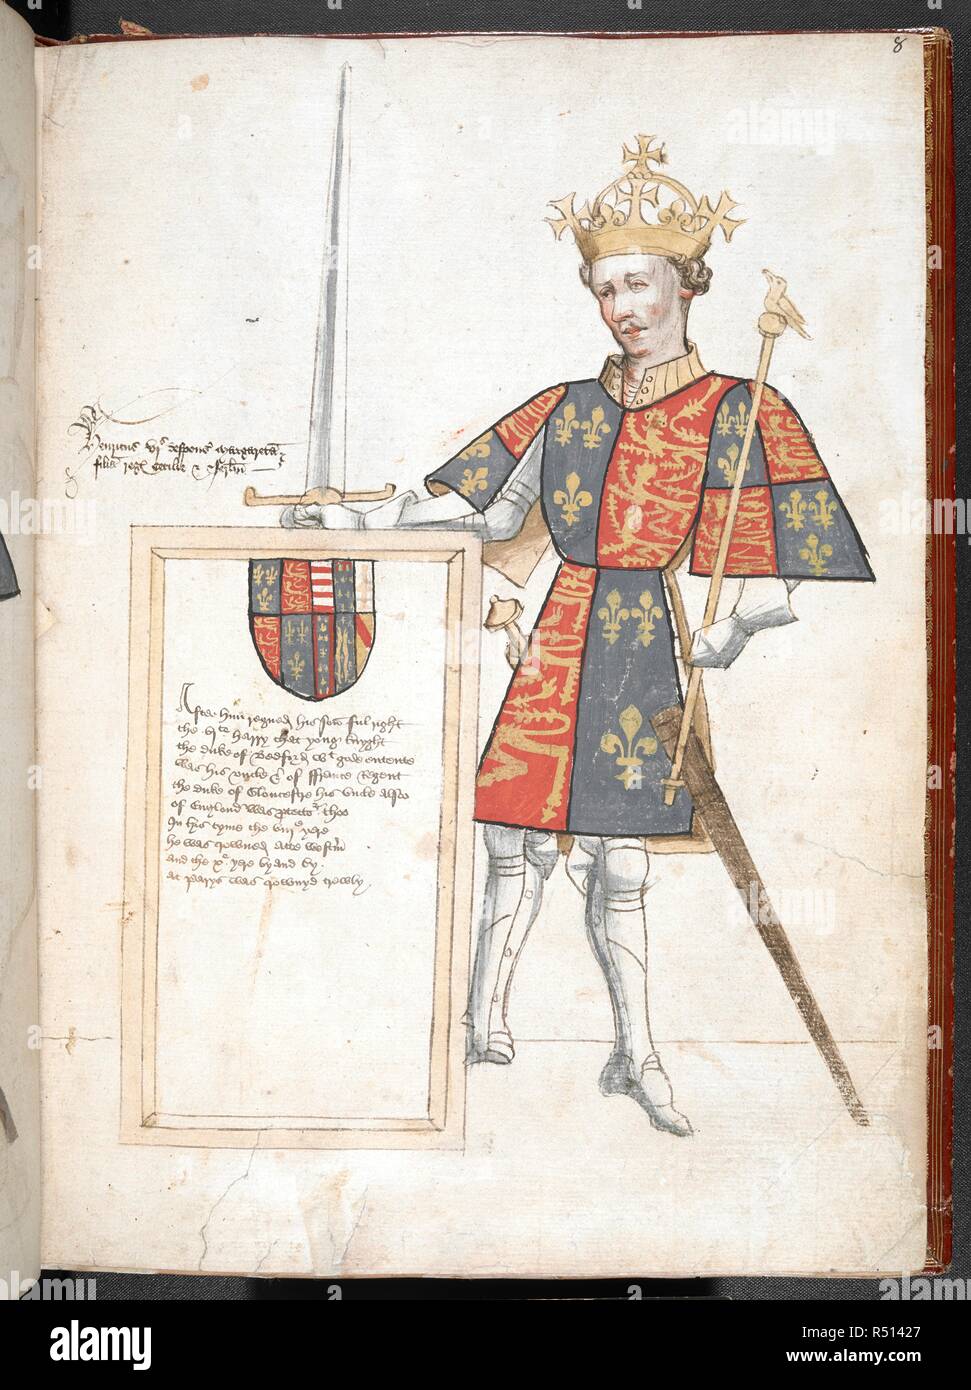 Coloured drawing of an English king in armour and tabard (Henry VI), presenting a plaque with verses. Sir Thomas Holme's Book of Arms: anonymous verses on the kings of England ... (Part 1 folios 1 to 8). England, S. E. (probably London); c. 1445-c. 1450. Numerous coloured drawings of English kings in armour and tabard, presenting a plaque with verses. Source: Harley 4205 f.8. Language: English. Gothic cursive. Stock Photo